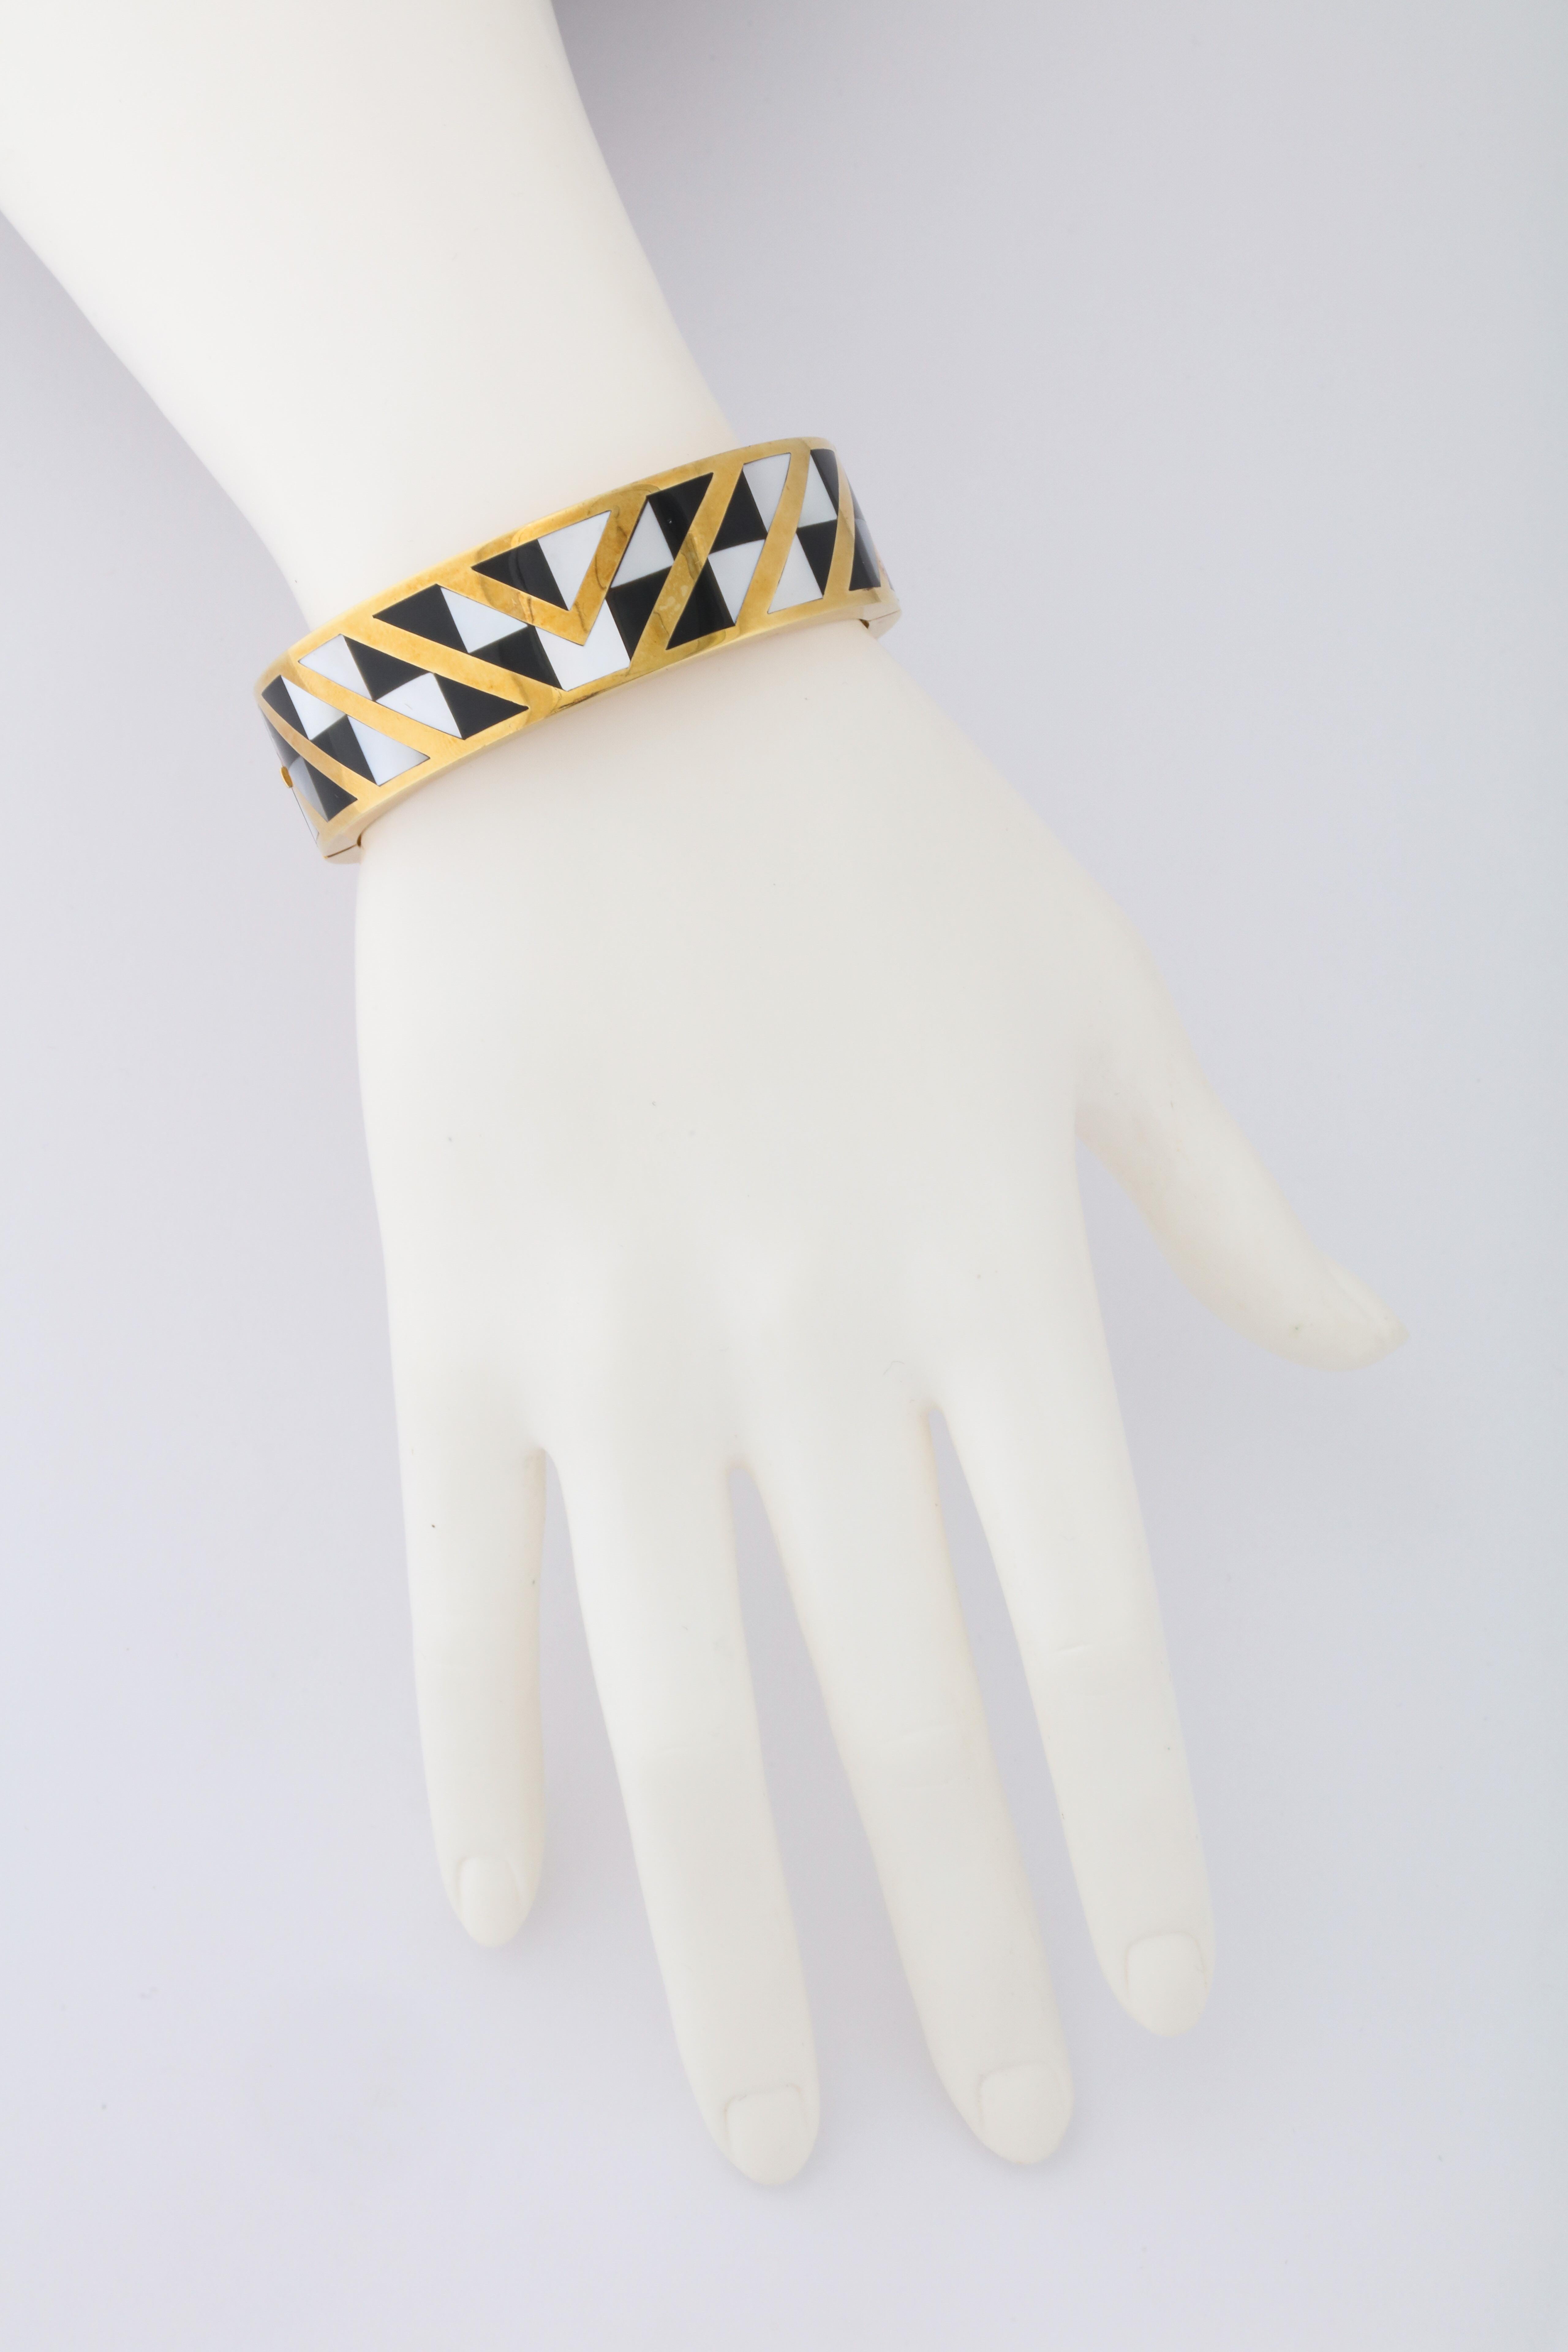 Chic contrast and geometric design in 18kt yellow gold with inlaid black onyx and white mother of pearl.  These designs were introduced to Tiffany and Co. by the designer Angela Cummings in the 1970s, and they remain an iconic Tiffany look. 